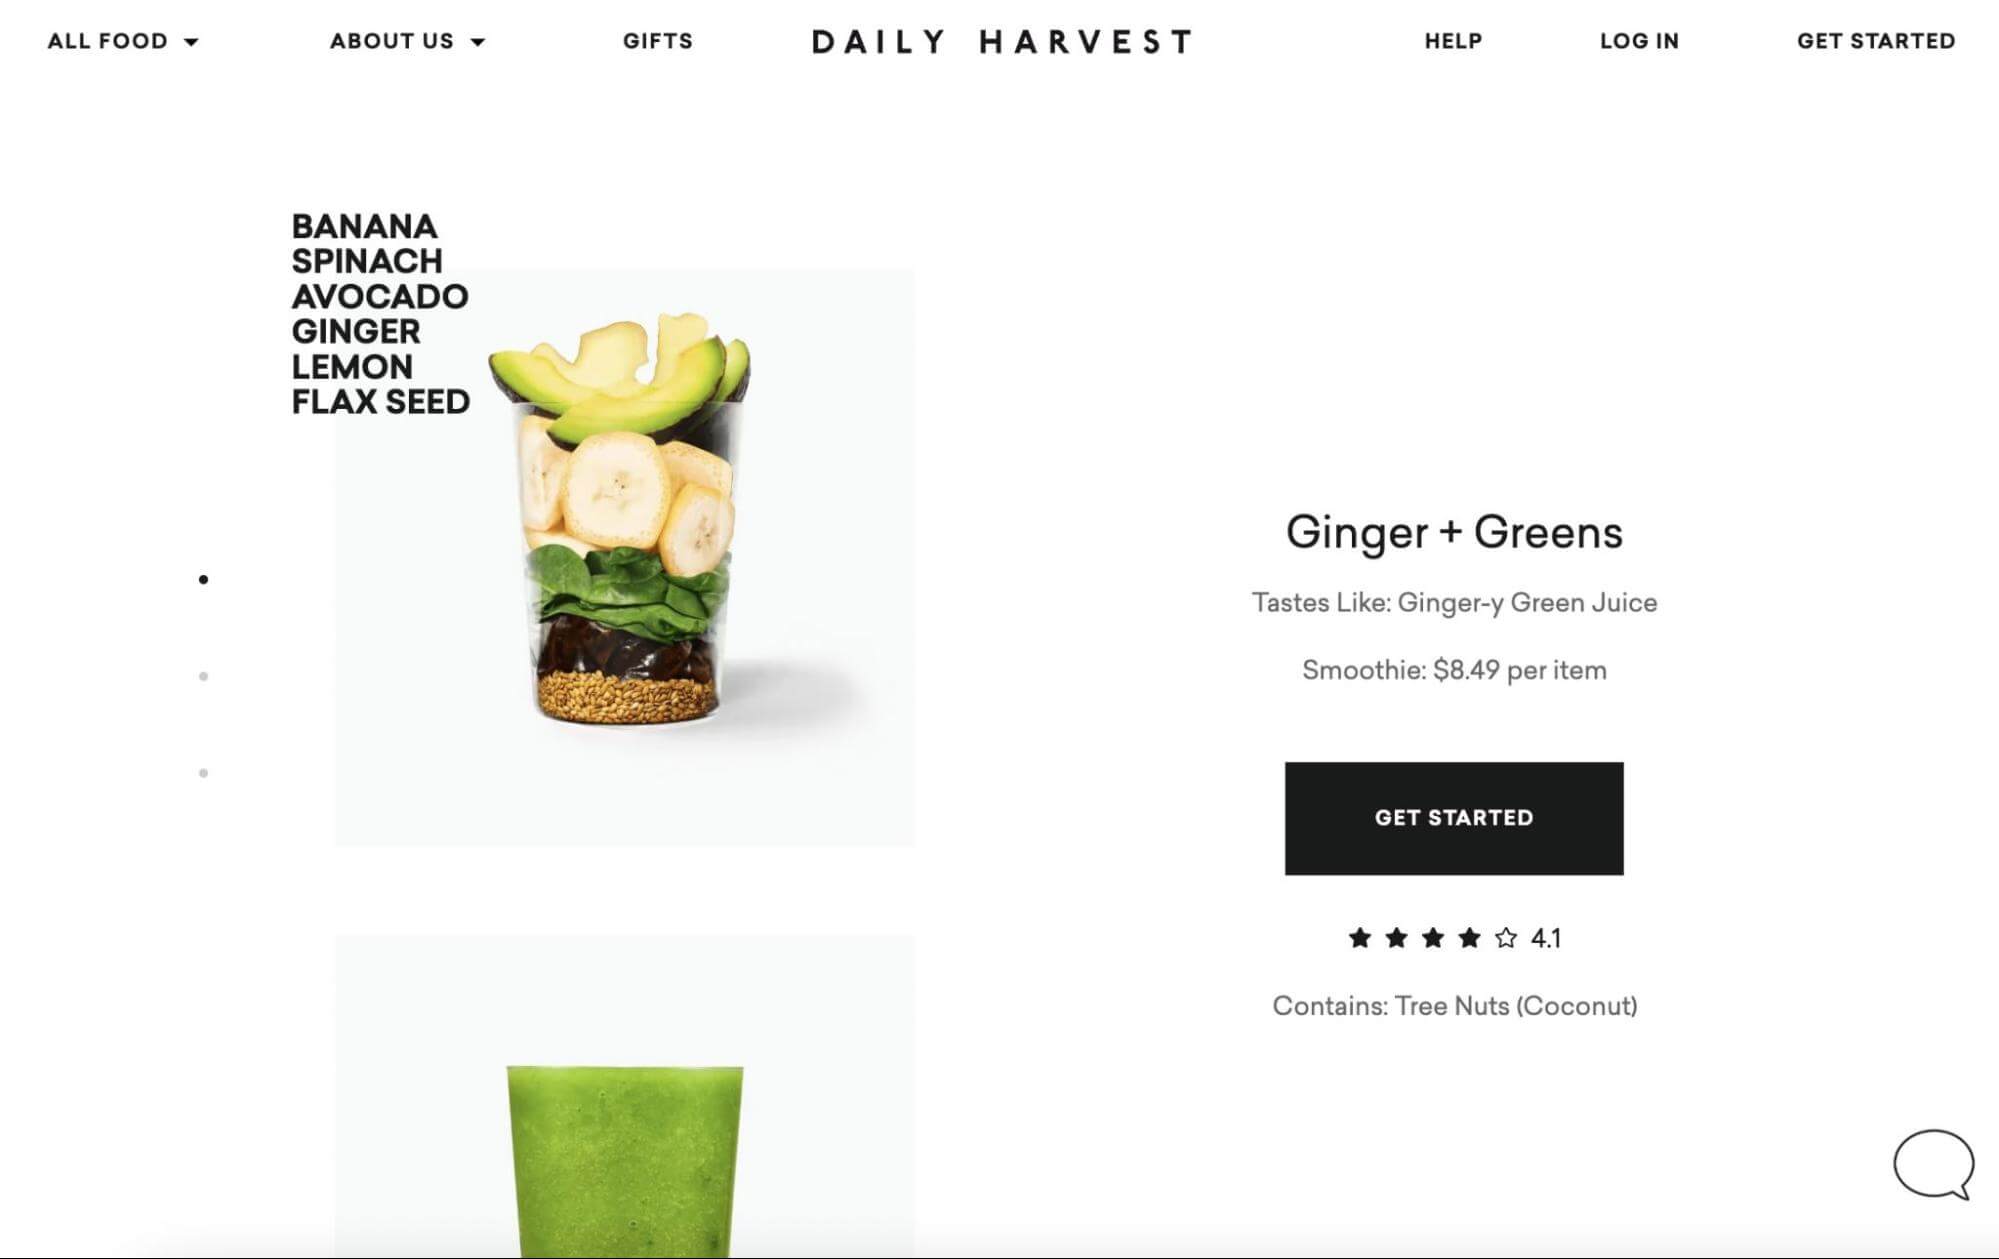 Daily Harvest landing page